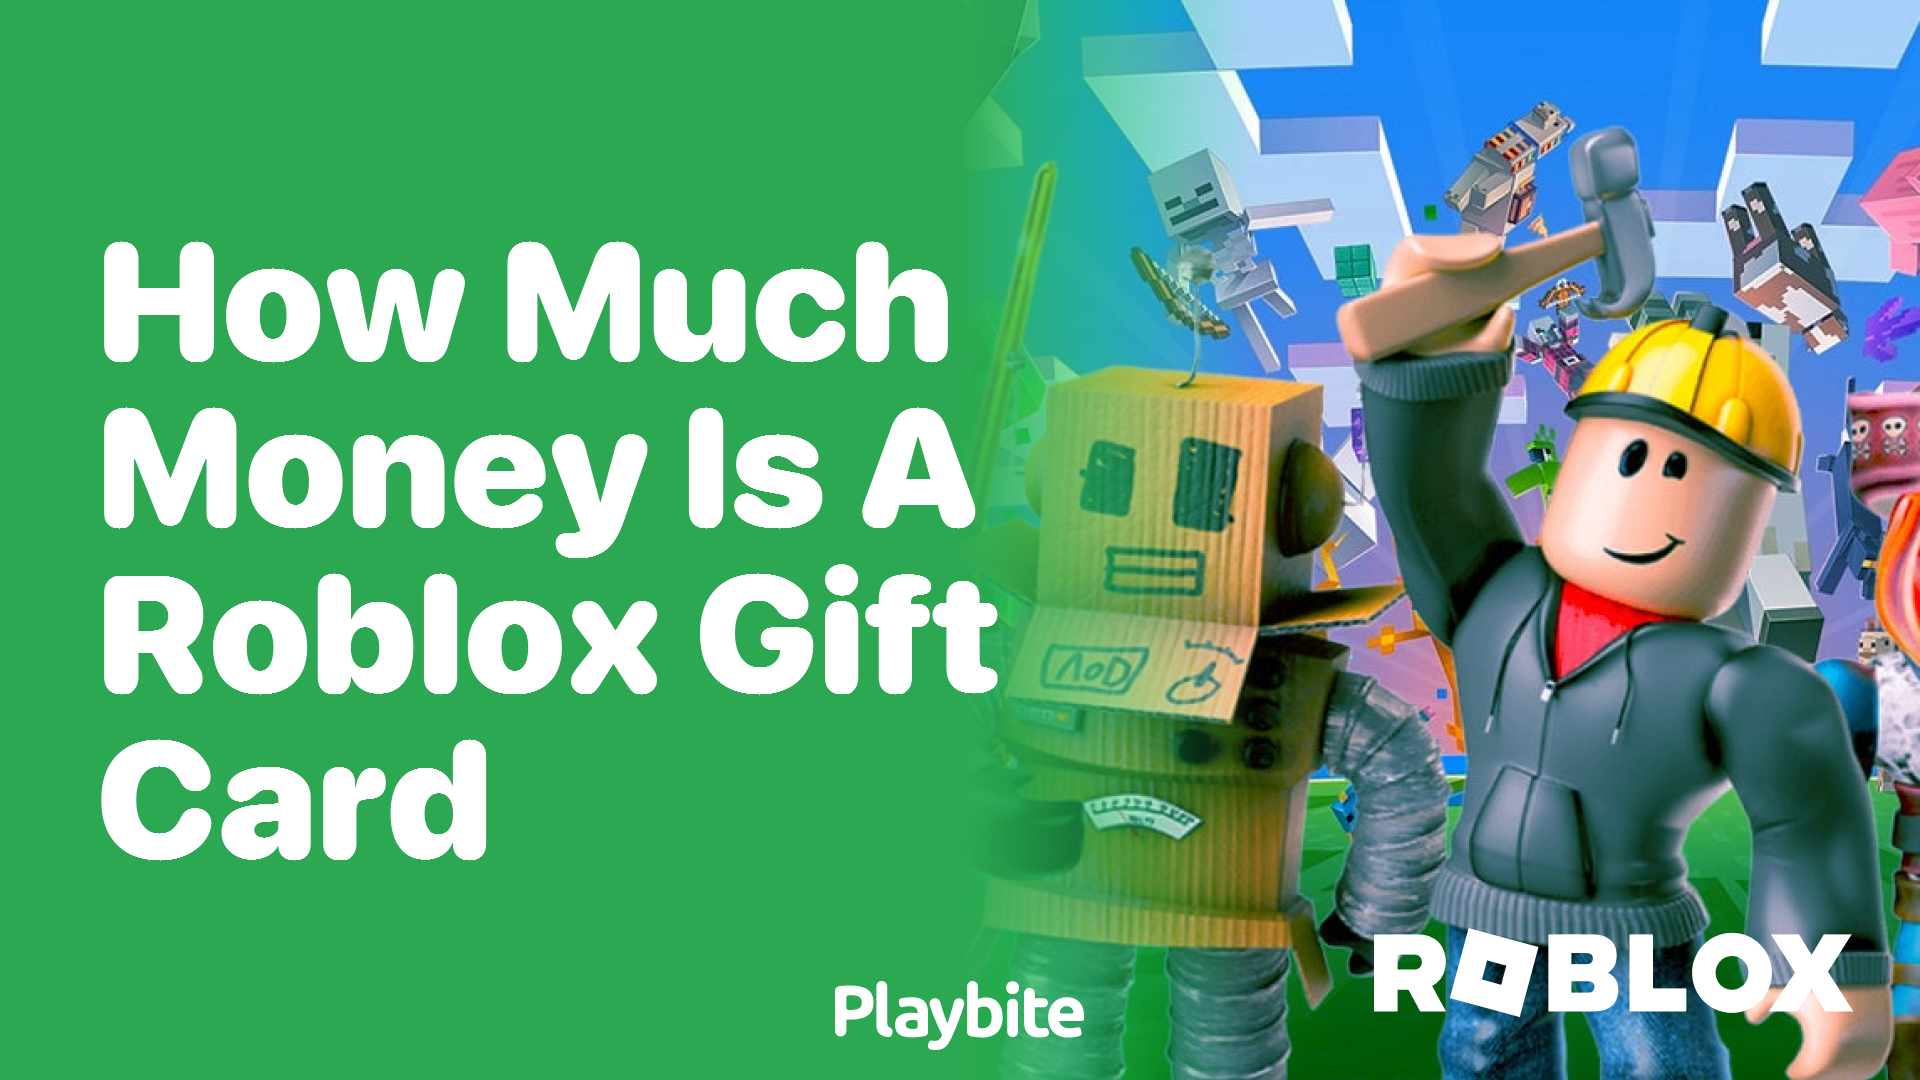 How Much Money is a Roblox Gift Card?